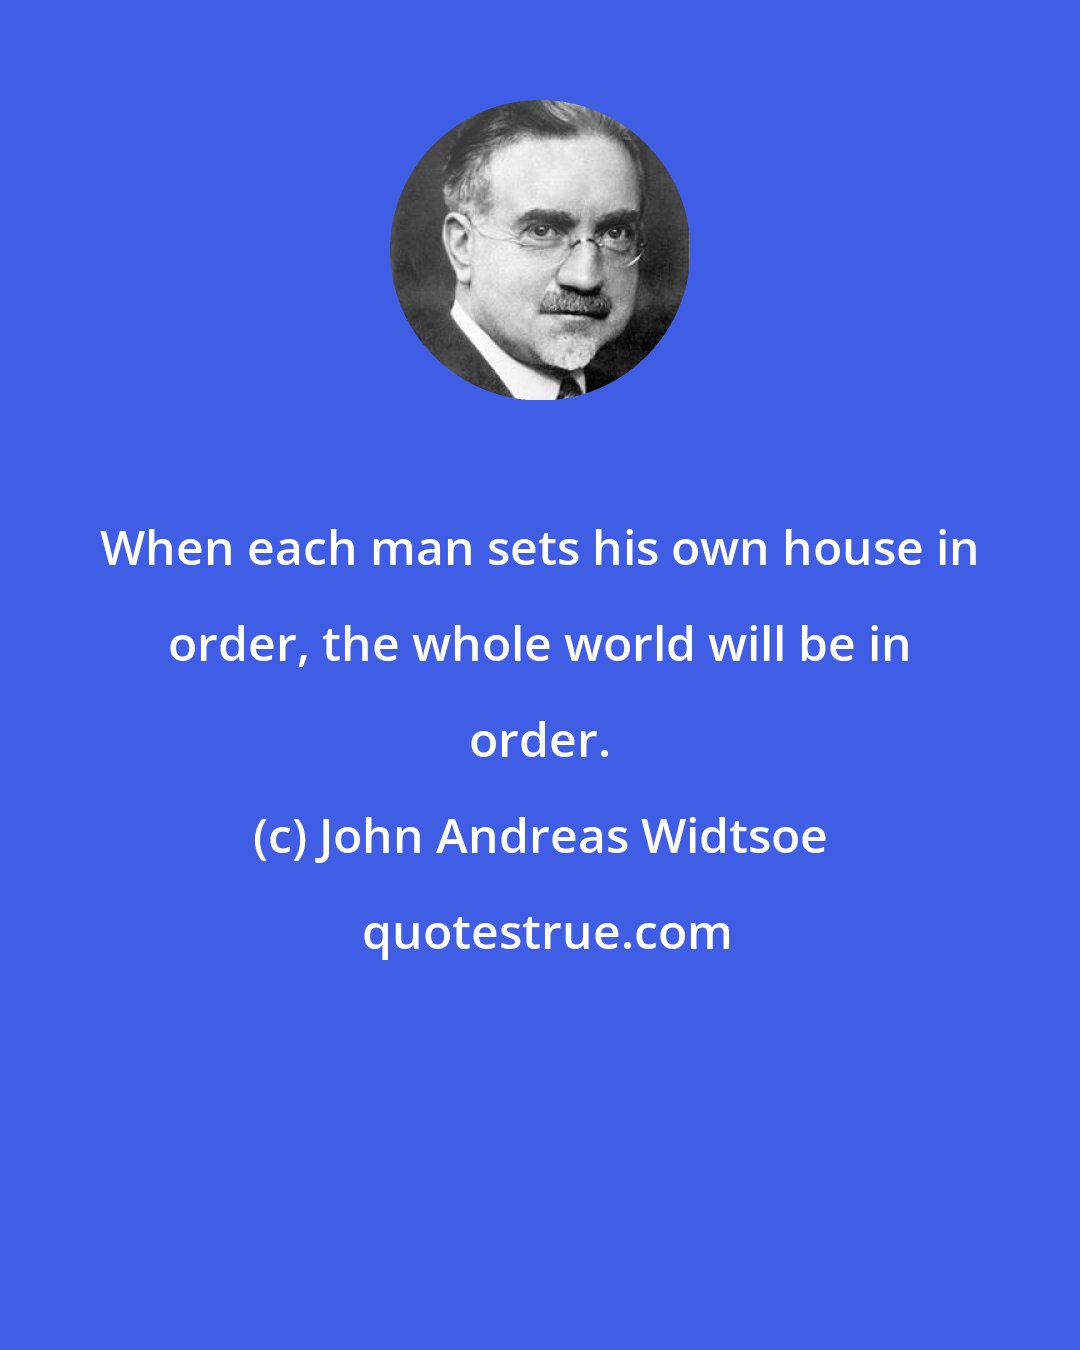 John Andreas Widtsoe: When each man sets his own house in order, the whole world will be in order.